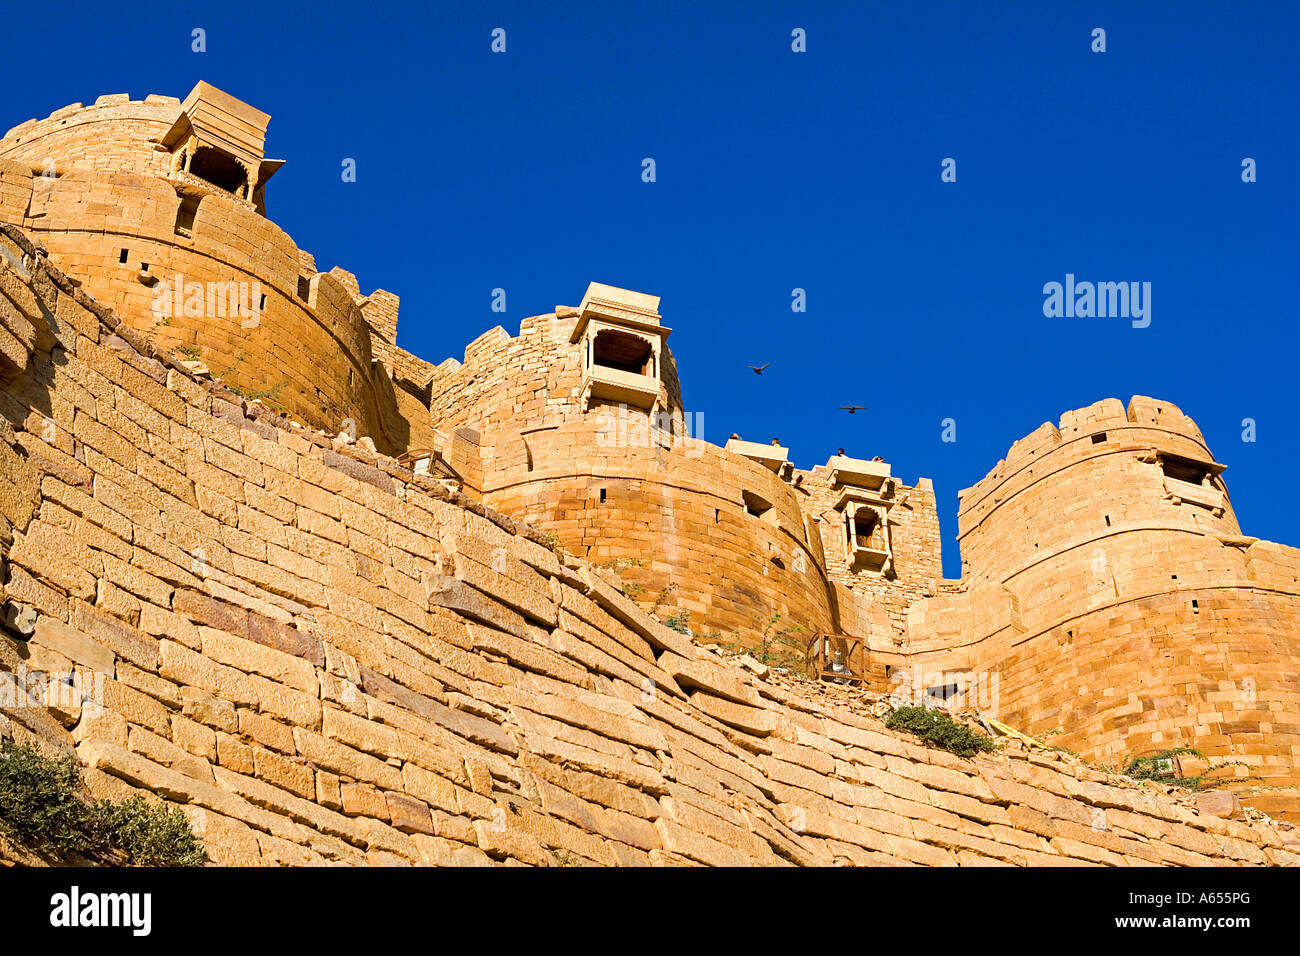 Battlements of the walled city of Jaiselmeer at dusk Rajasthan India Stock Photo